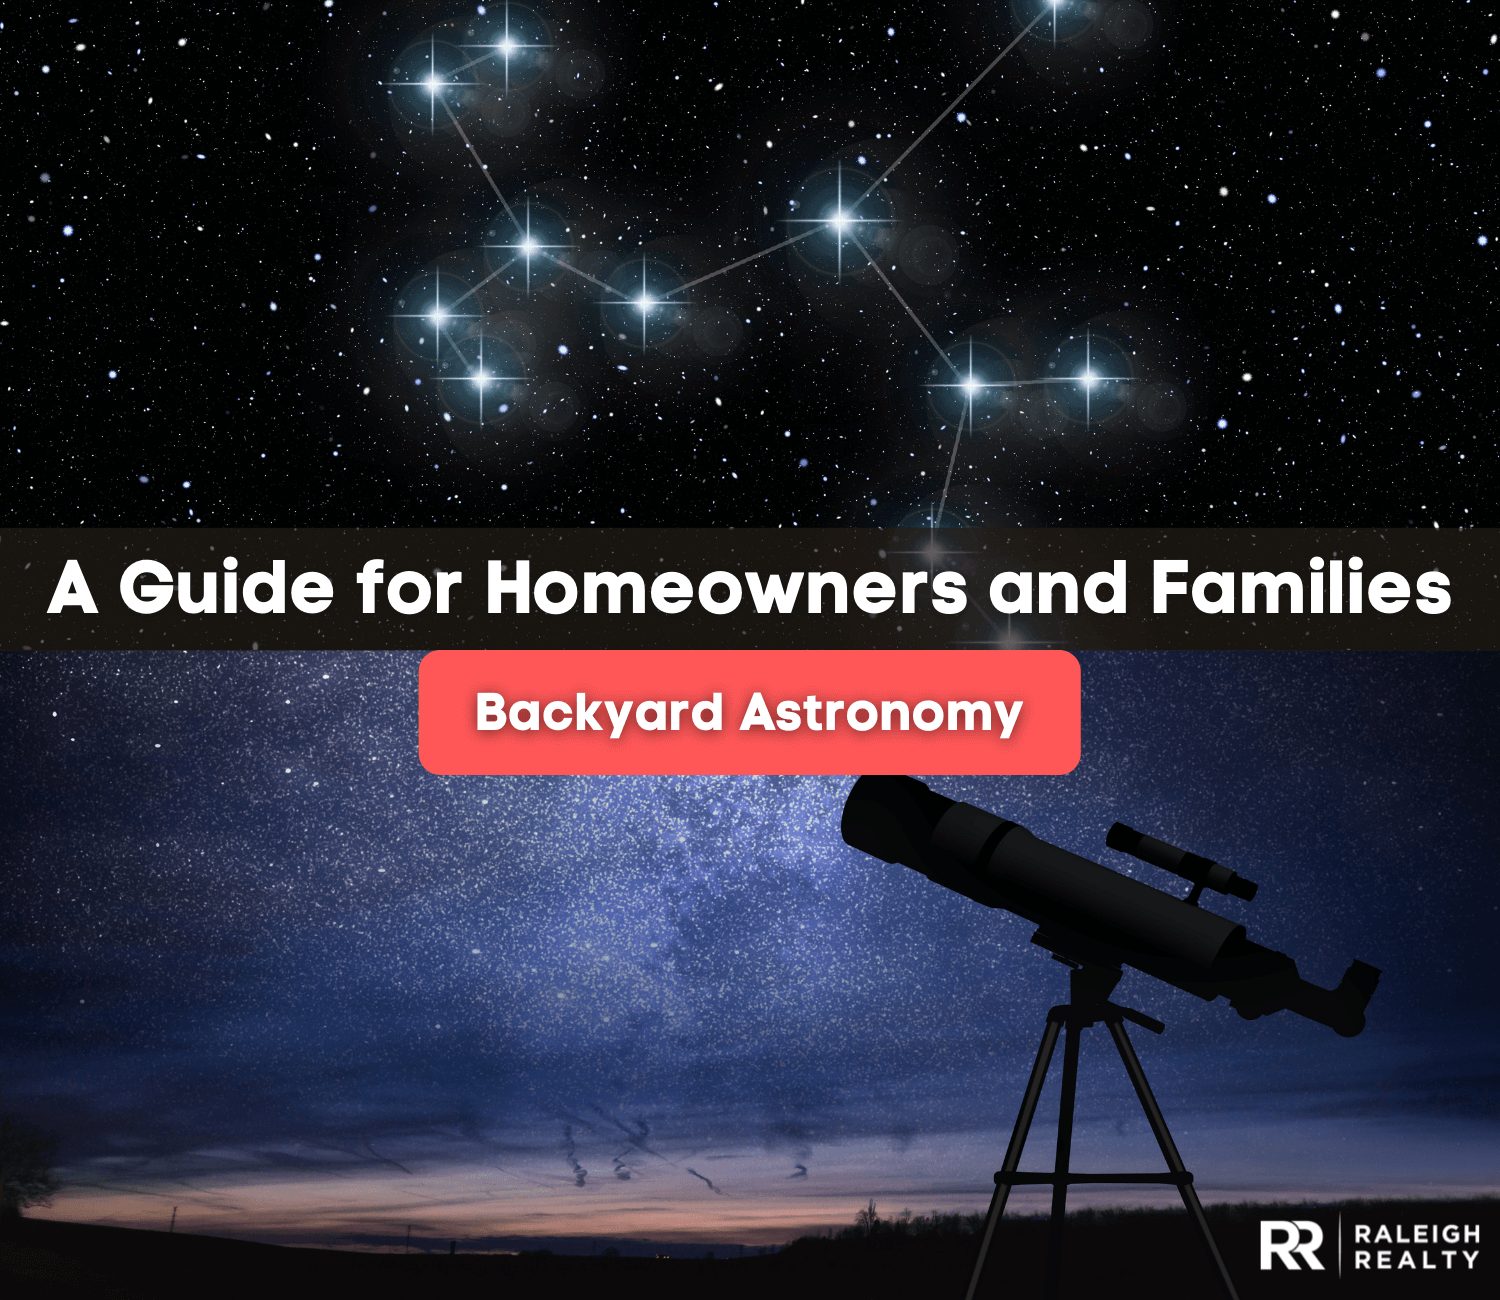 Backyard Astronomy A Guide for Homeowners and Families